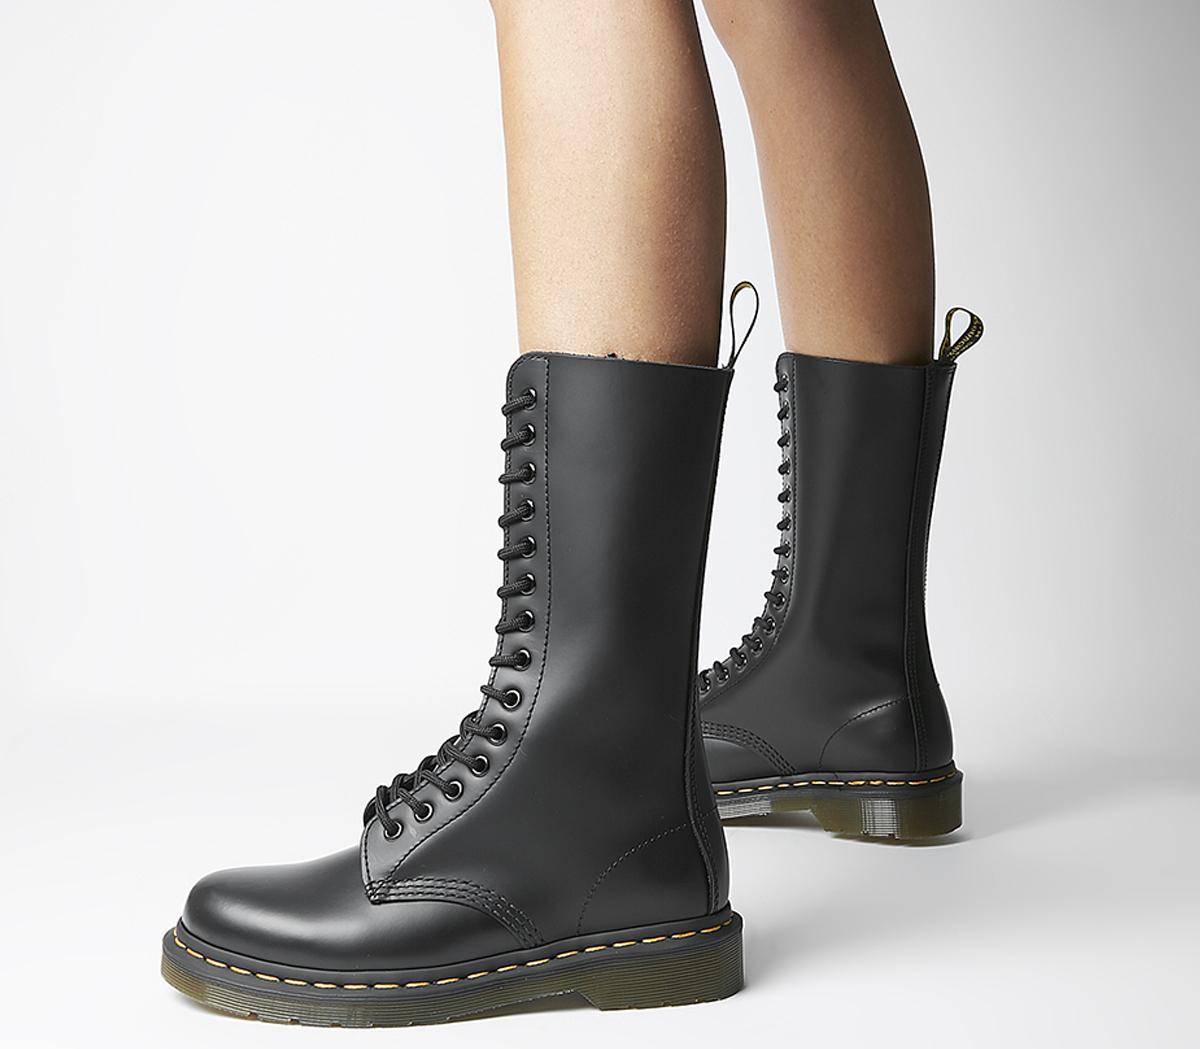 doc martens 14 eye boot laces